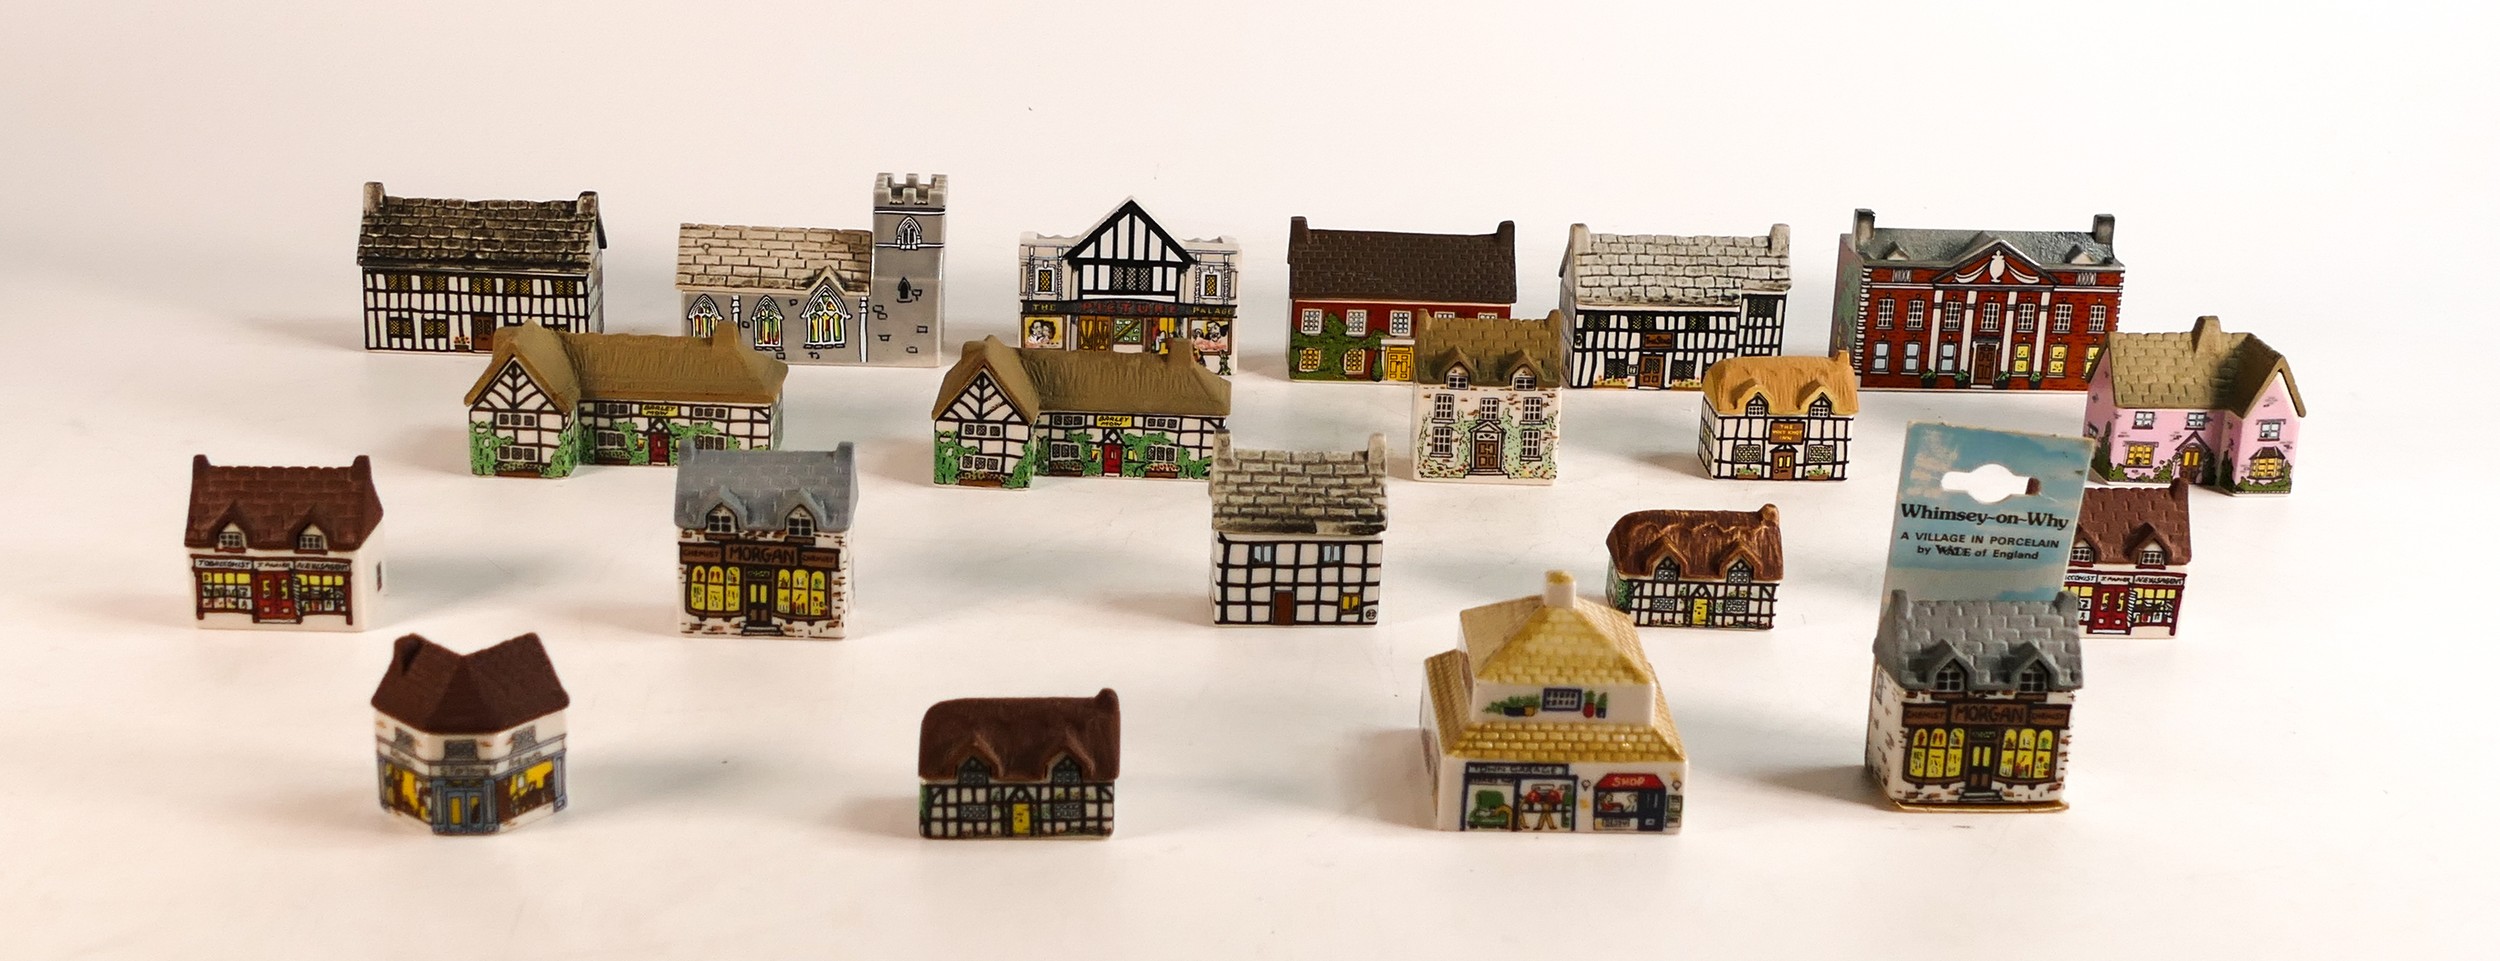 A collection of Wade Whimsey-on-Why Village figures including numbers 1, 4, 8, 10, 15, 20, 22, 24, - Image 2 of 2